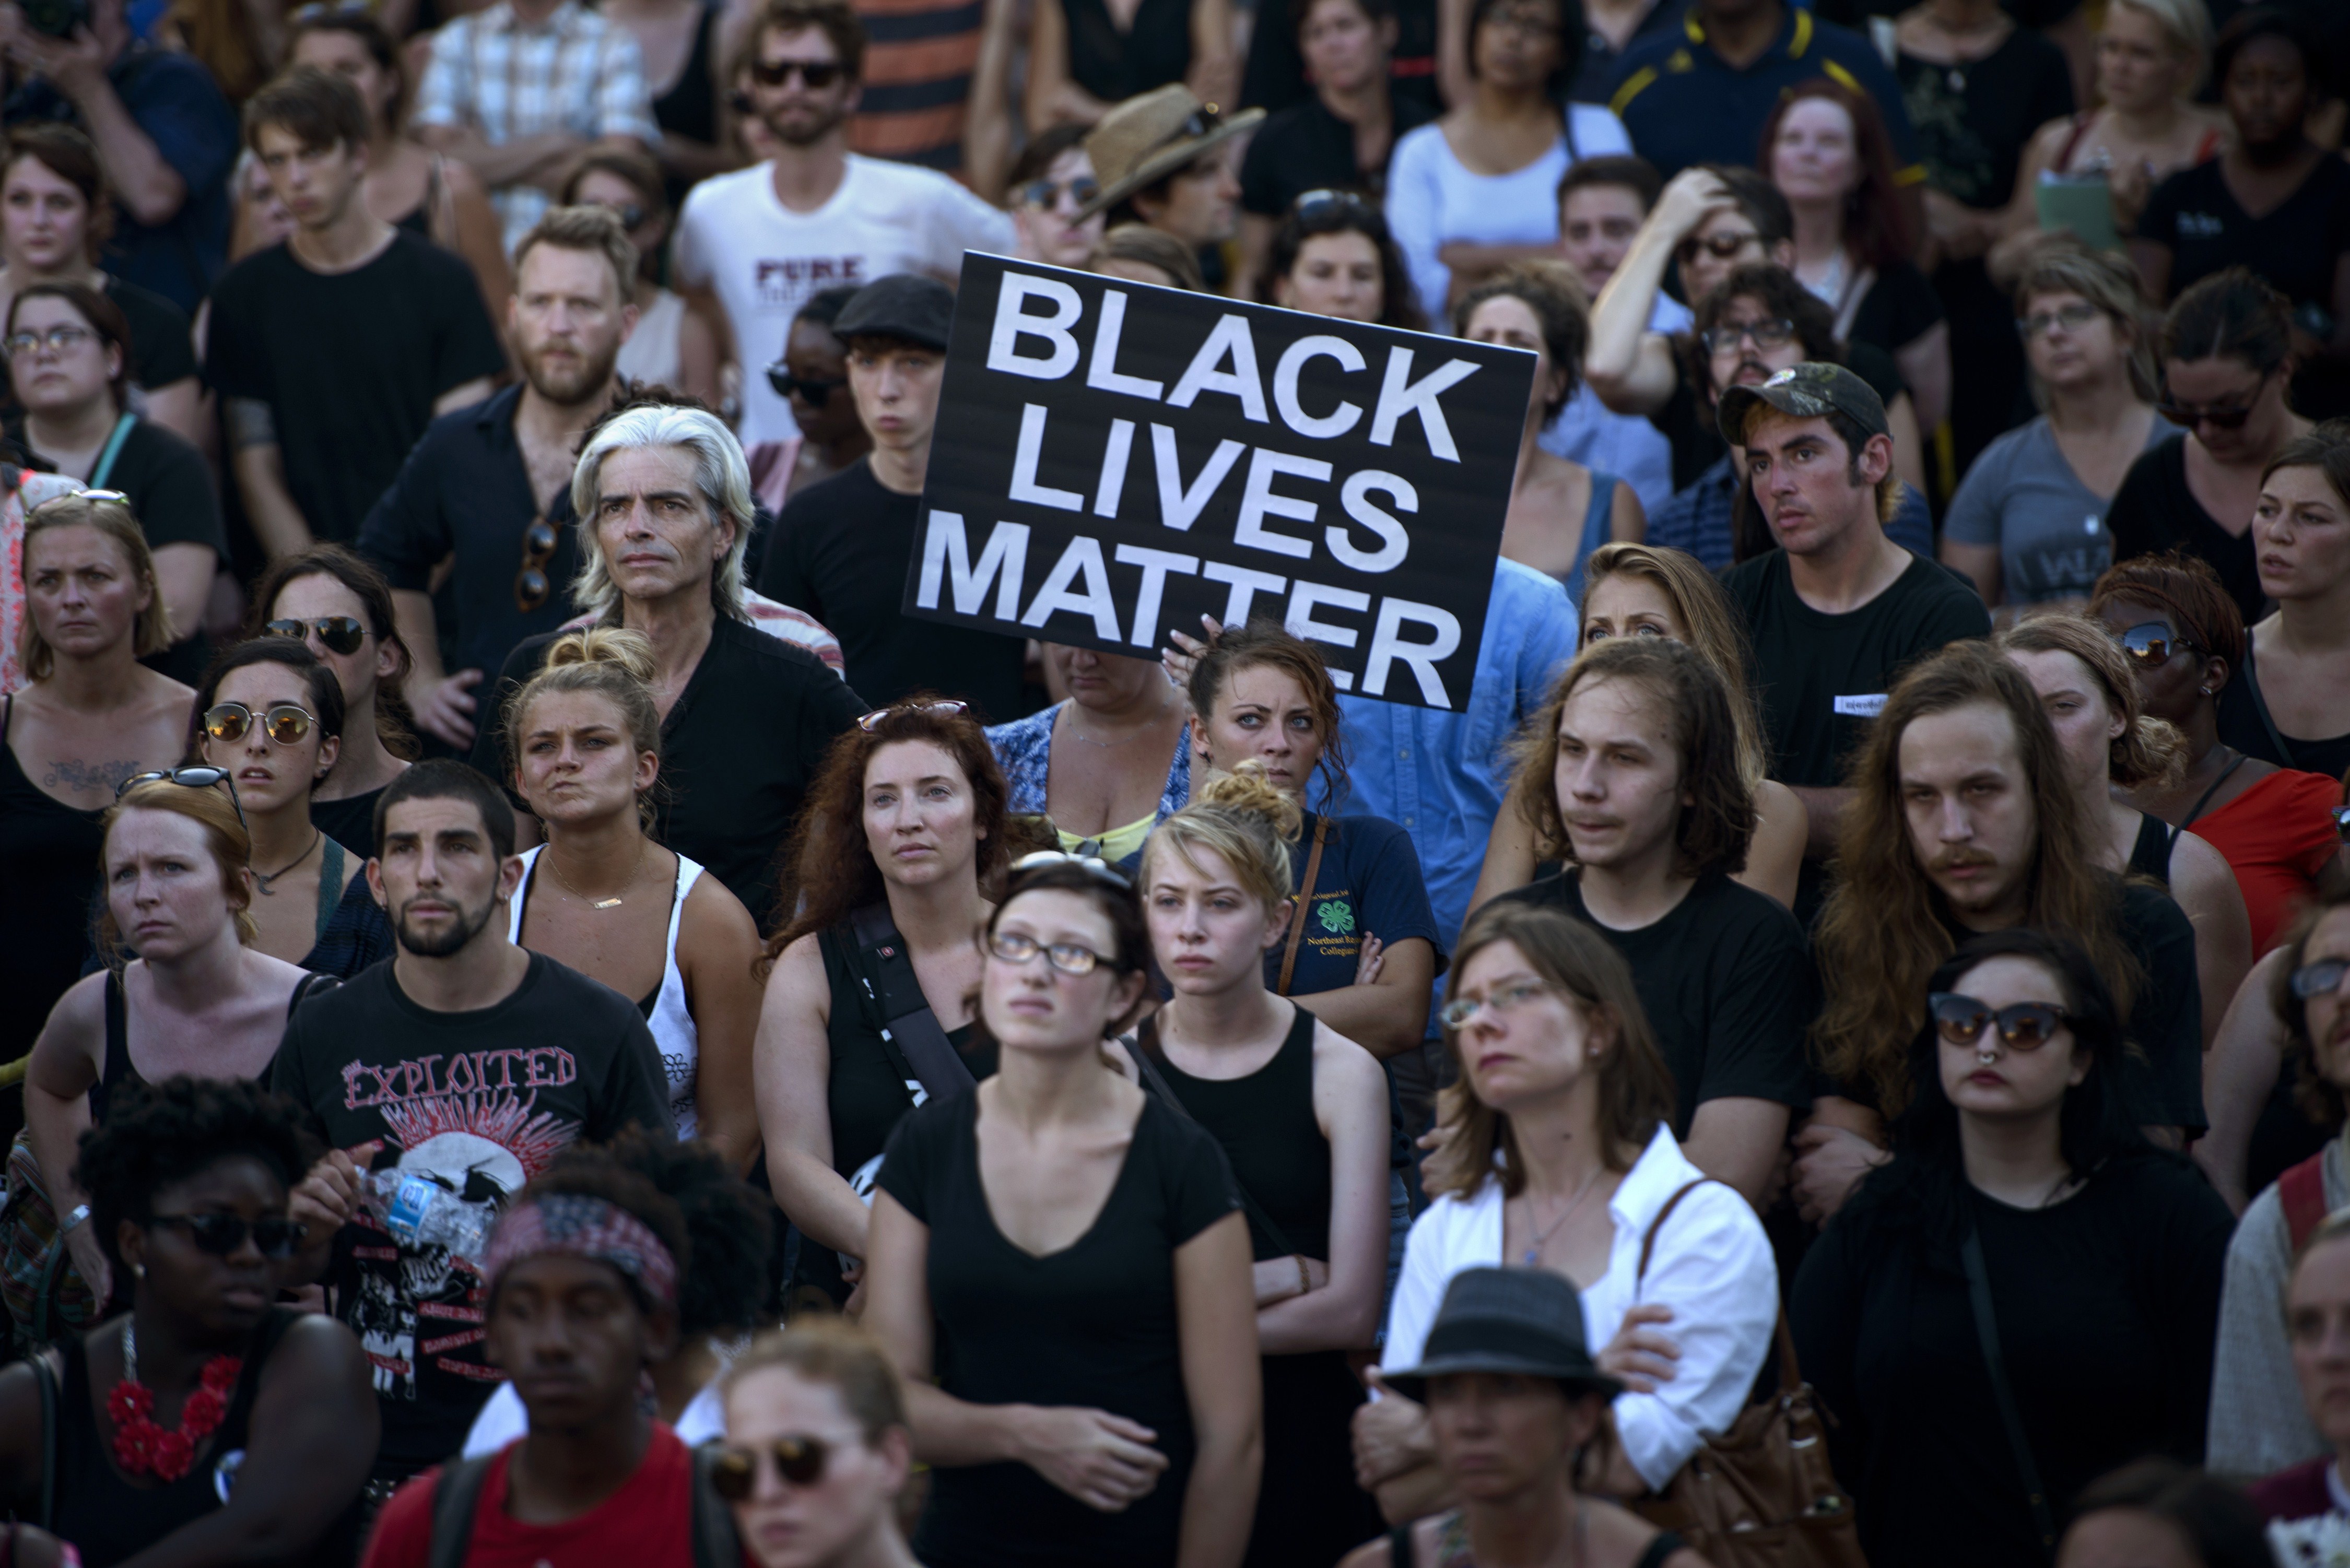 People gather at the Confederate Museum during a protest in Charleston, South Carolina on June 20, 2015. (BRENDAN SMIALOWSKI&mdash;AFP/Getty Images)